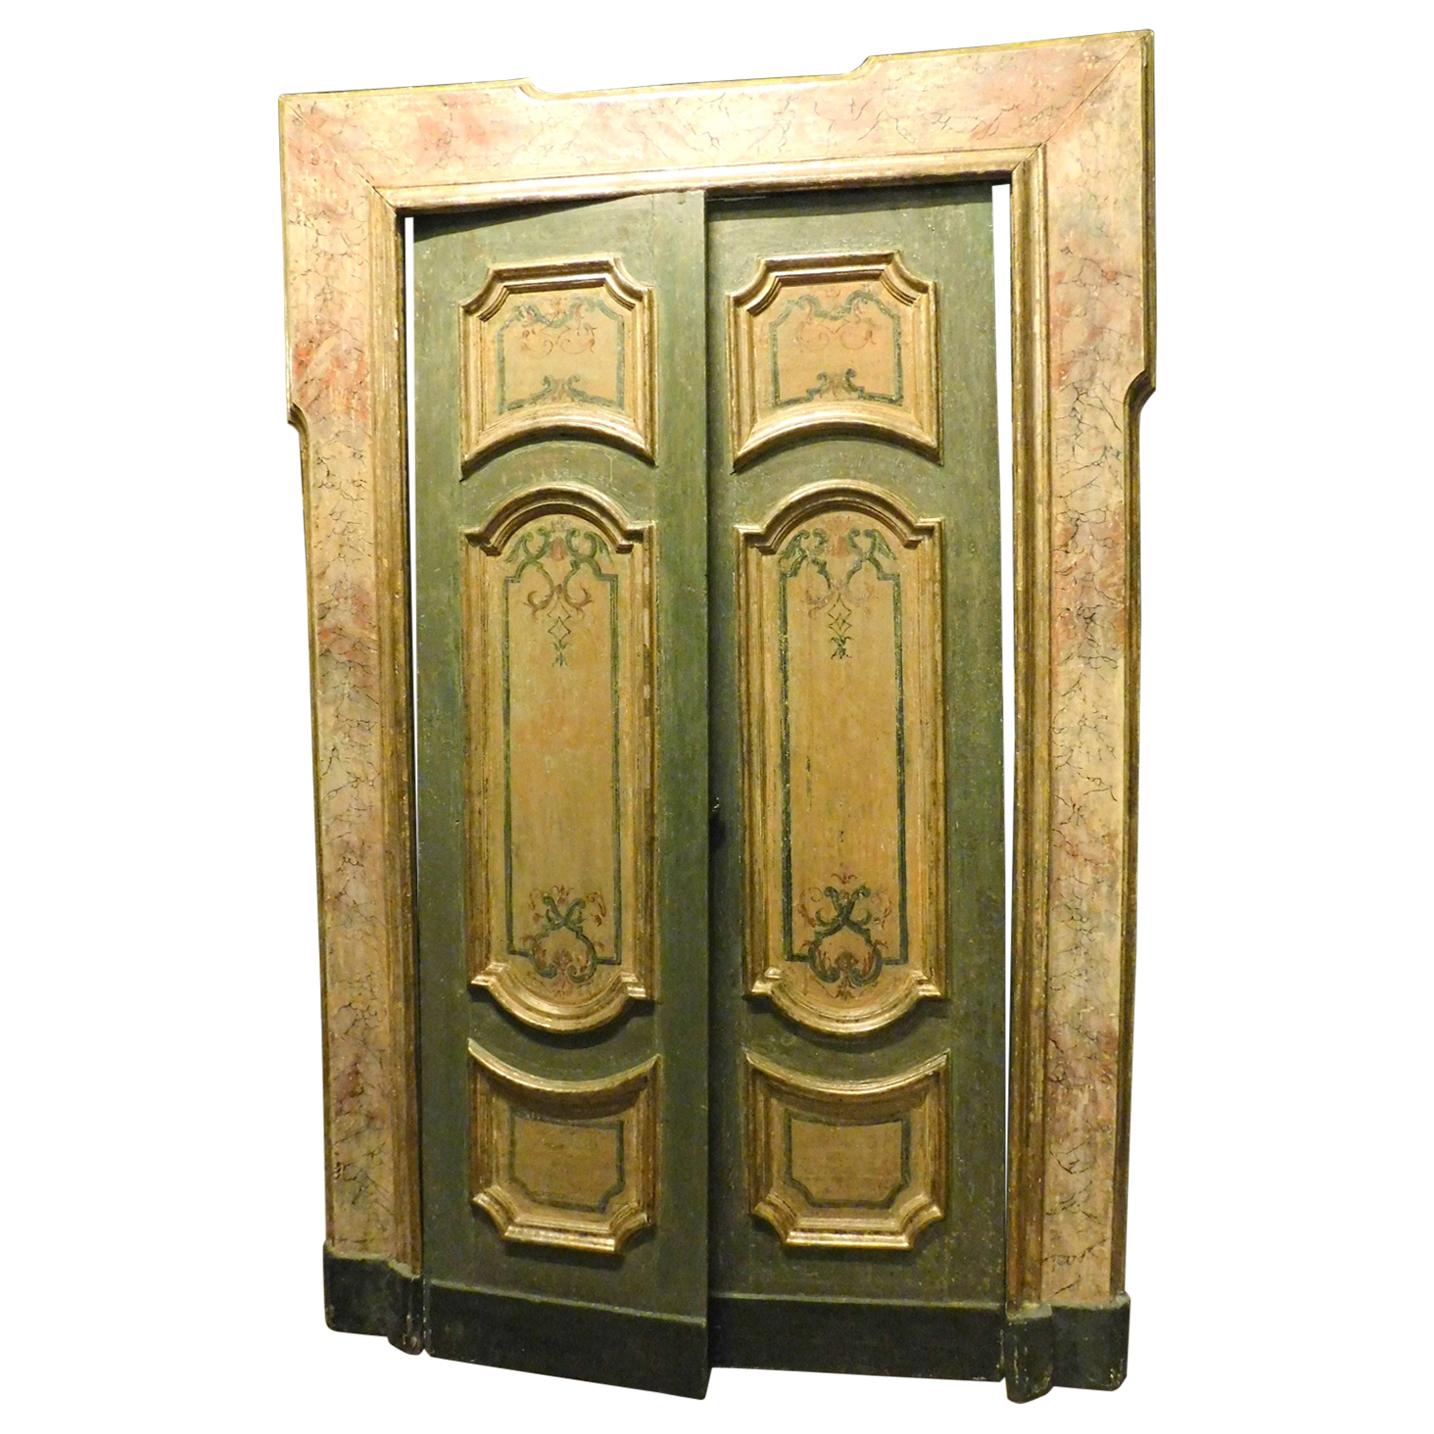 Antique Lacquered Gilded Door with Painted Panels, Complete Frame, 1700, Italy For Sale